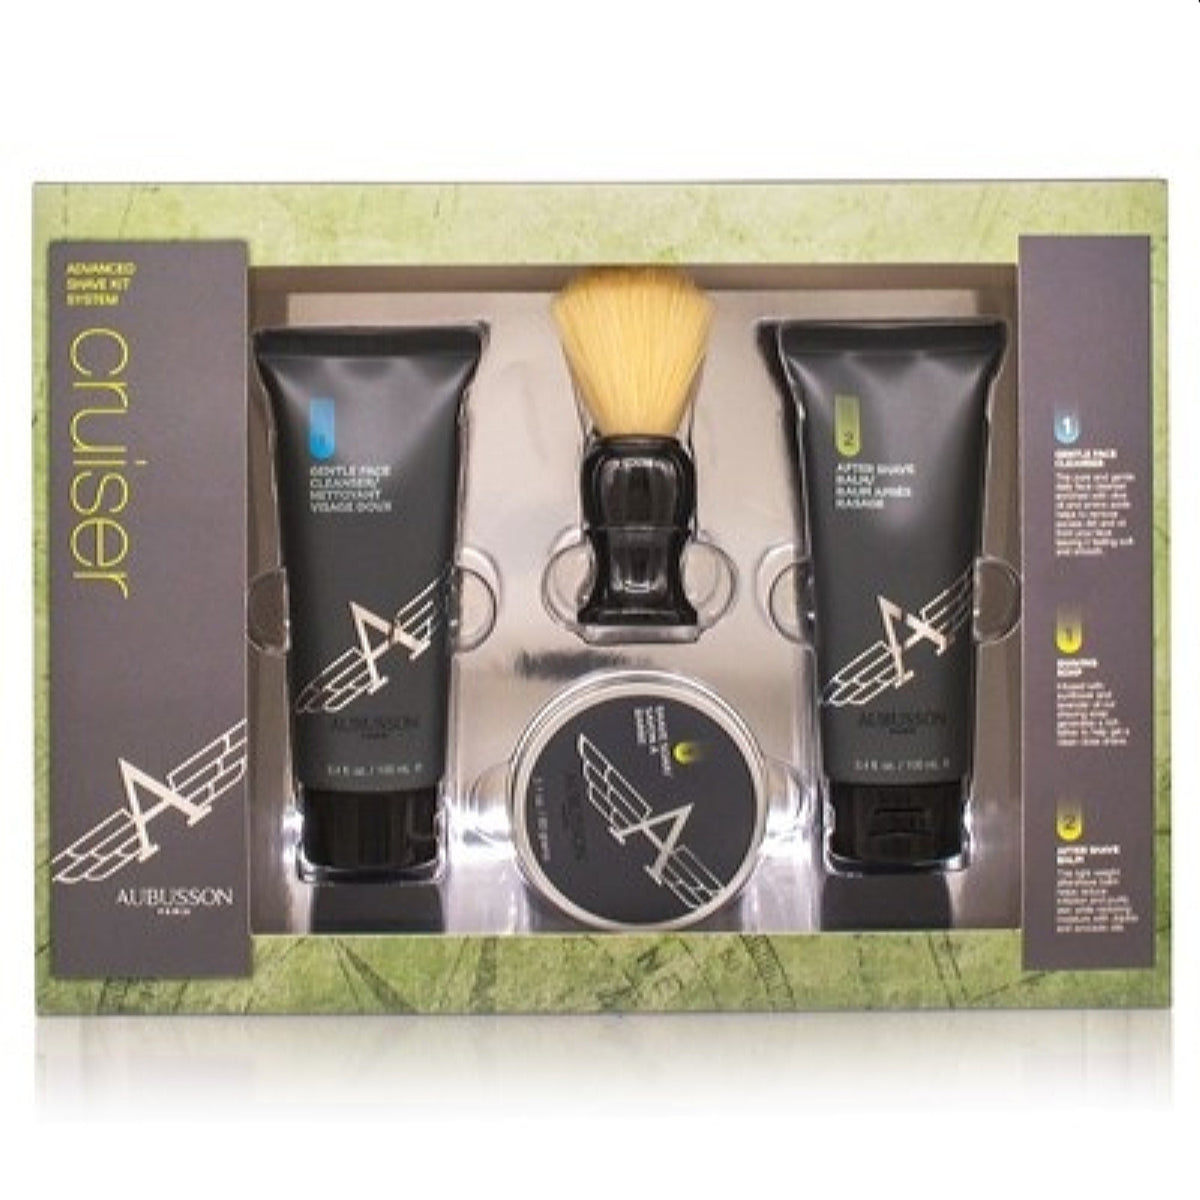 Aubusson Grooming Advance Shave Kit System Aubusson Set For Men 04X1004